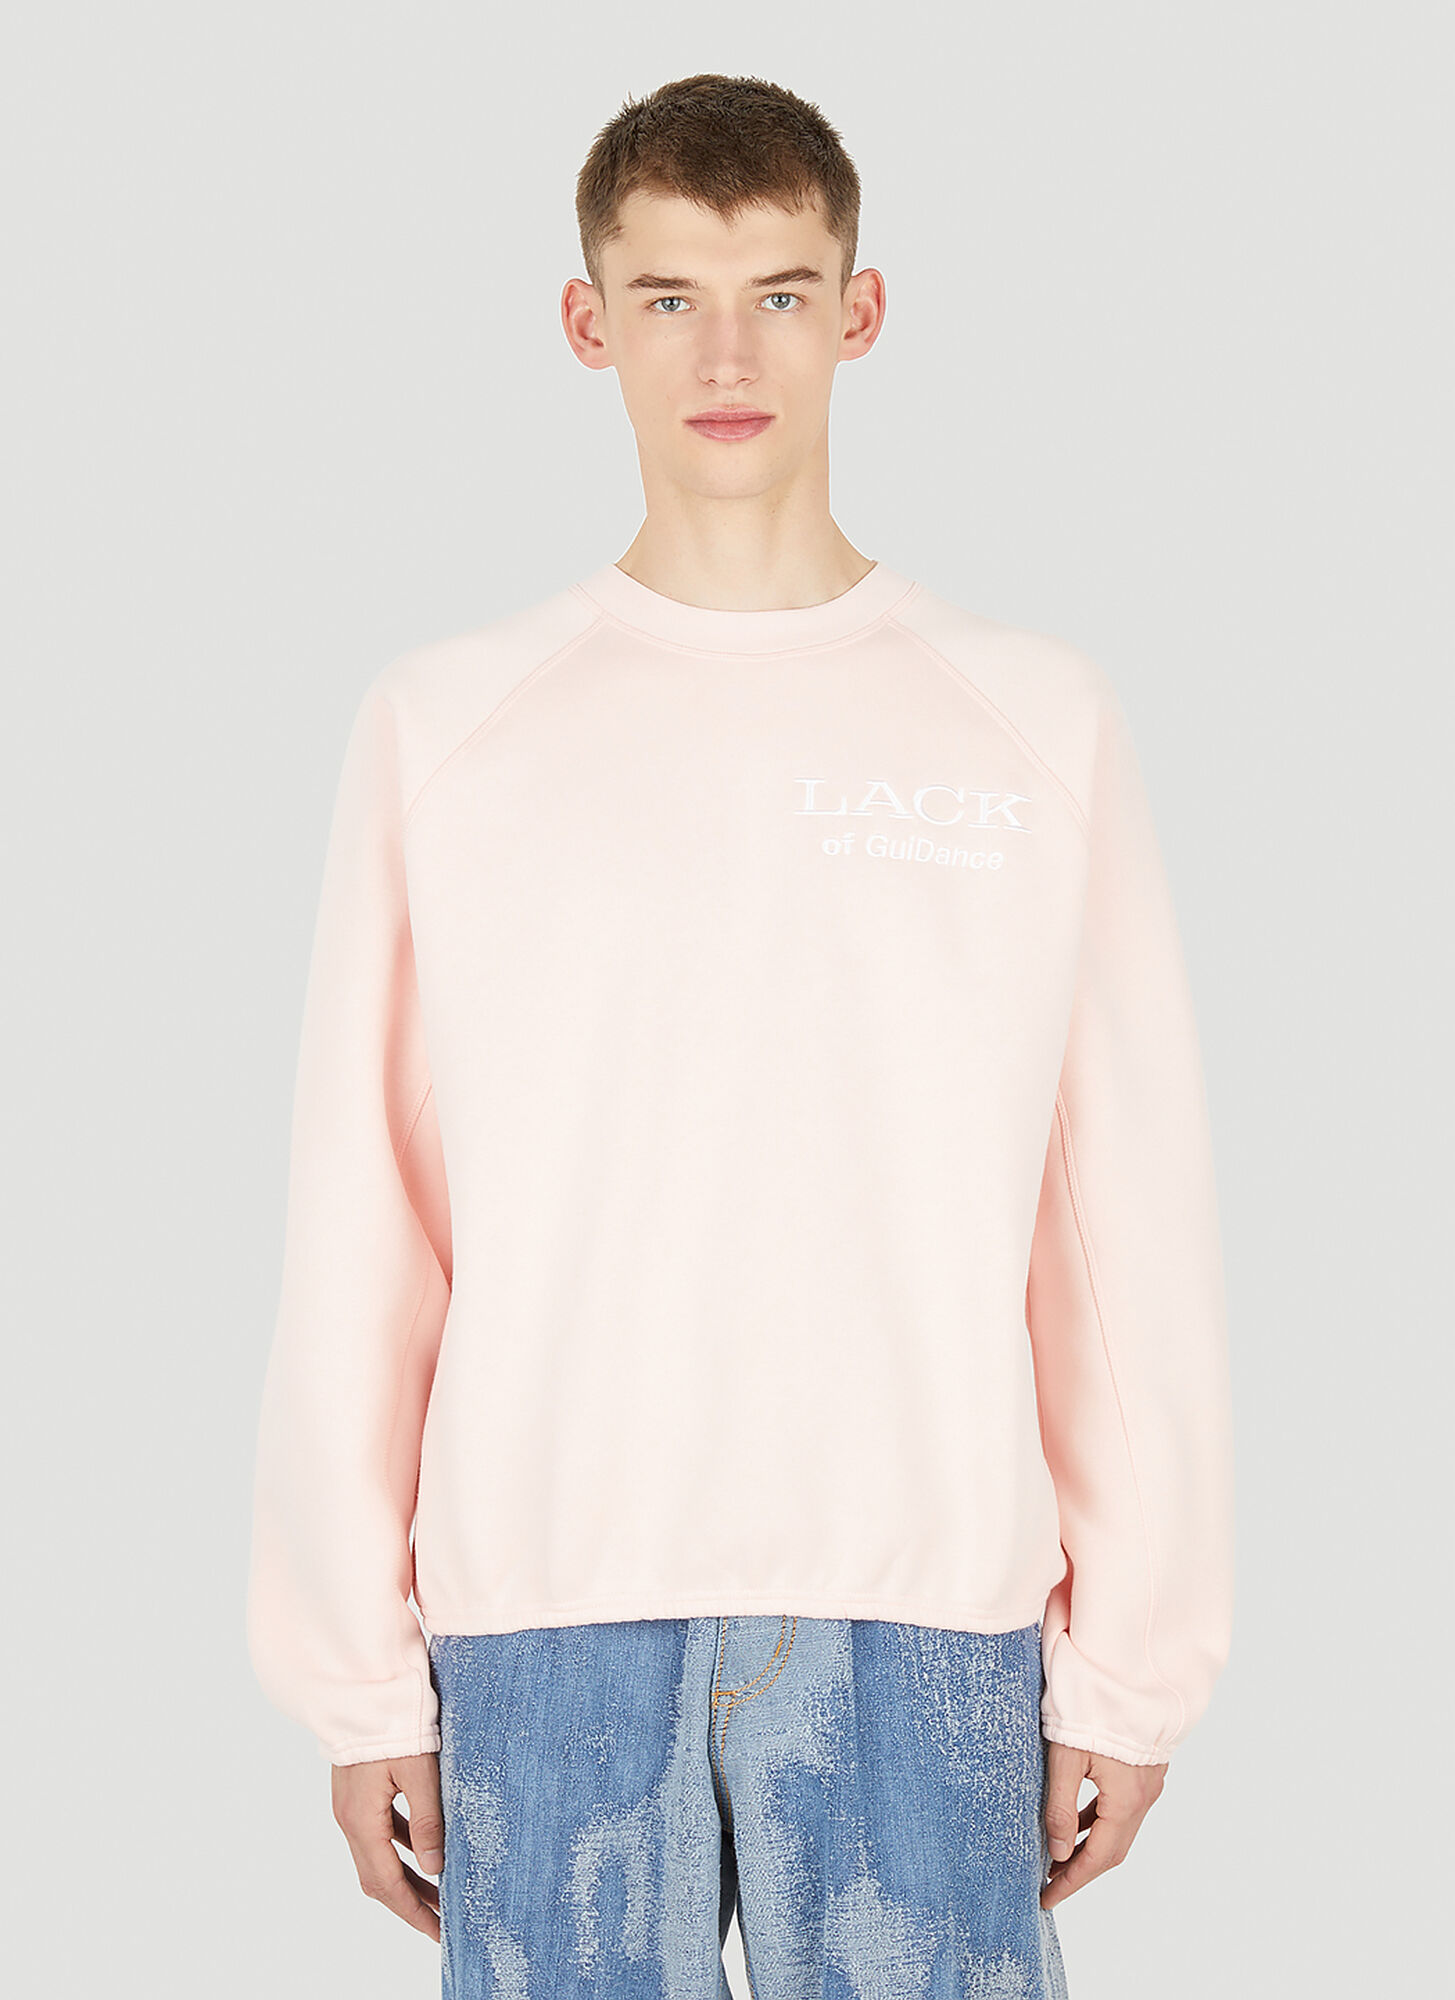 Lack Of Guidance Alessandro Sweatshirt In Pink